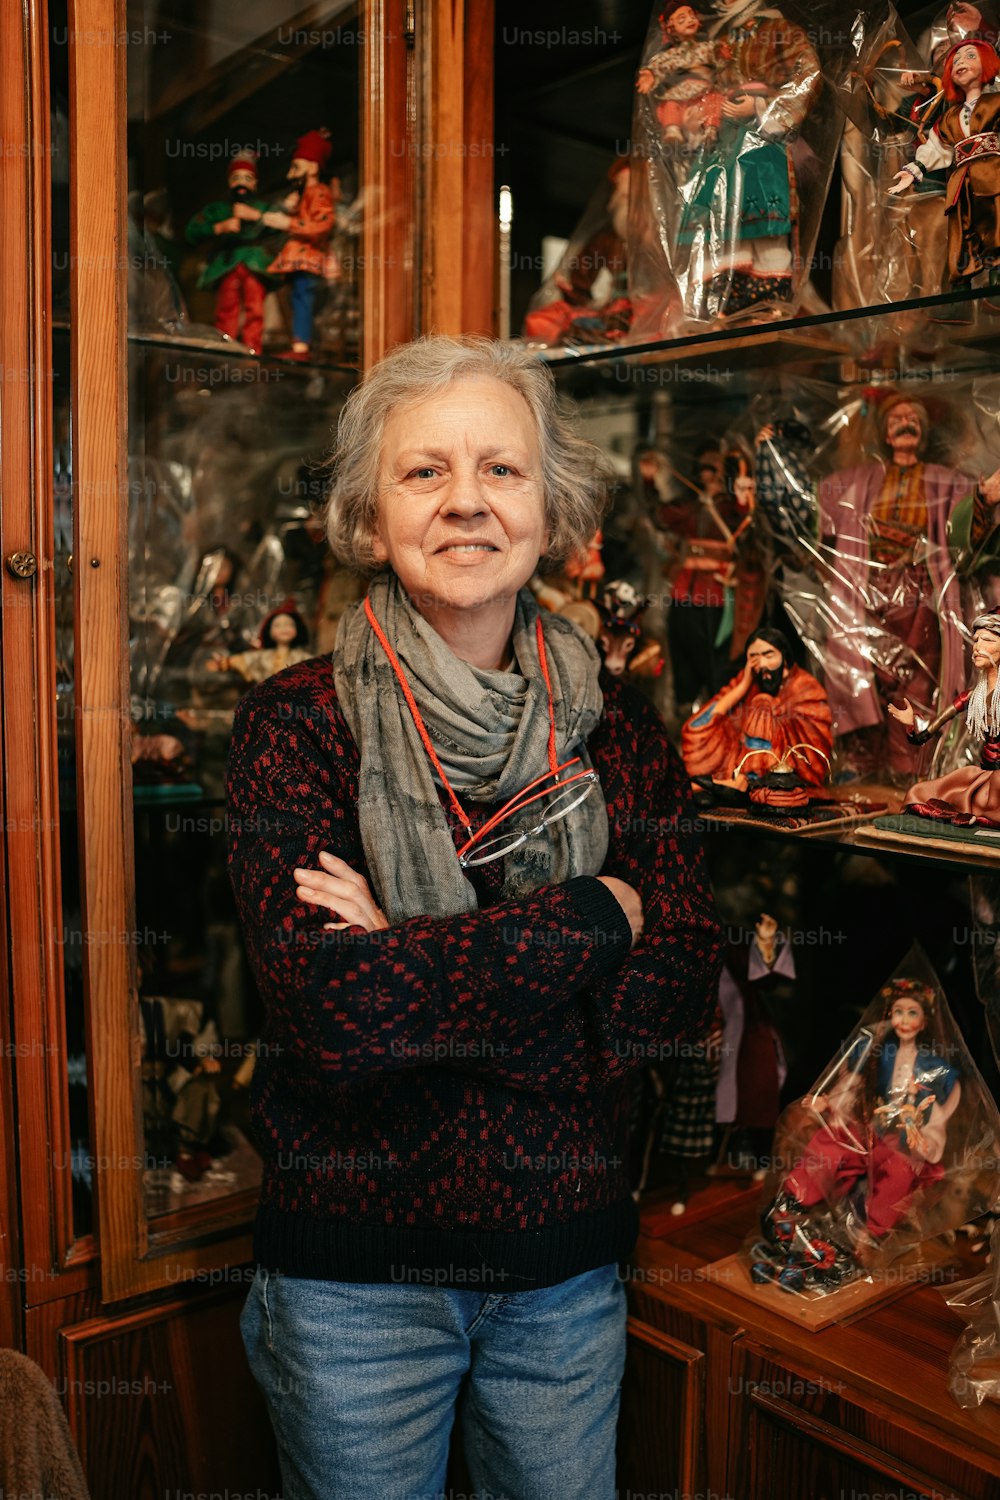 a woman standing in front of a display case filled with figurines